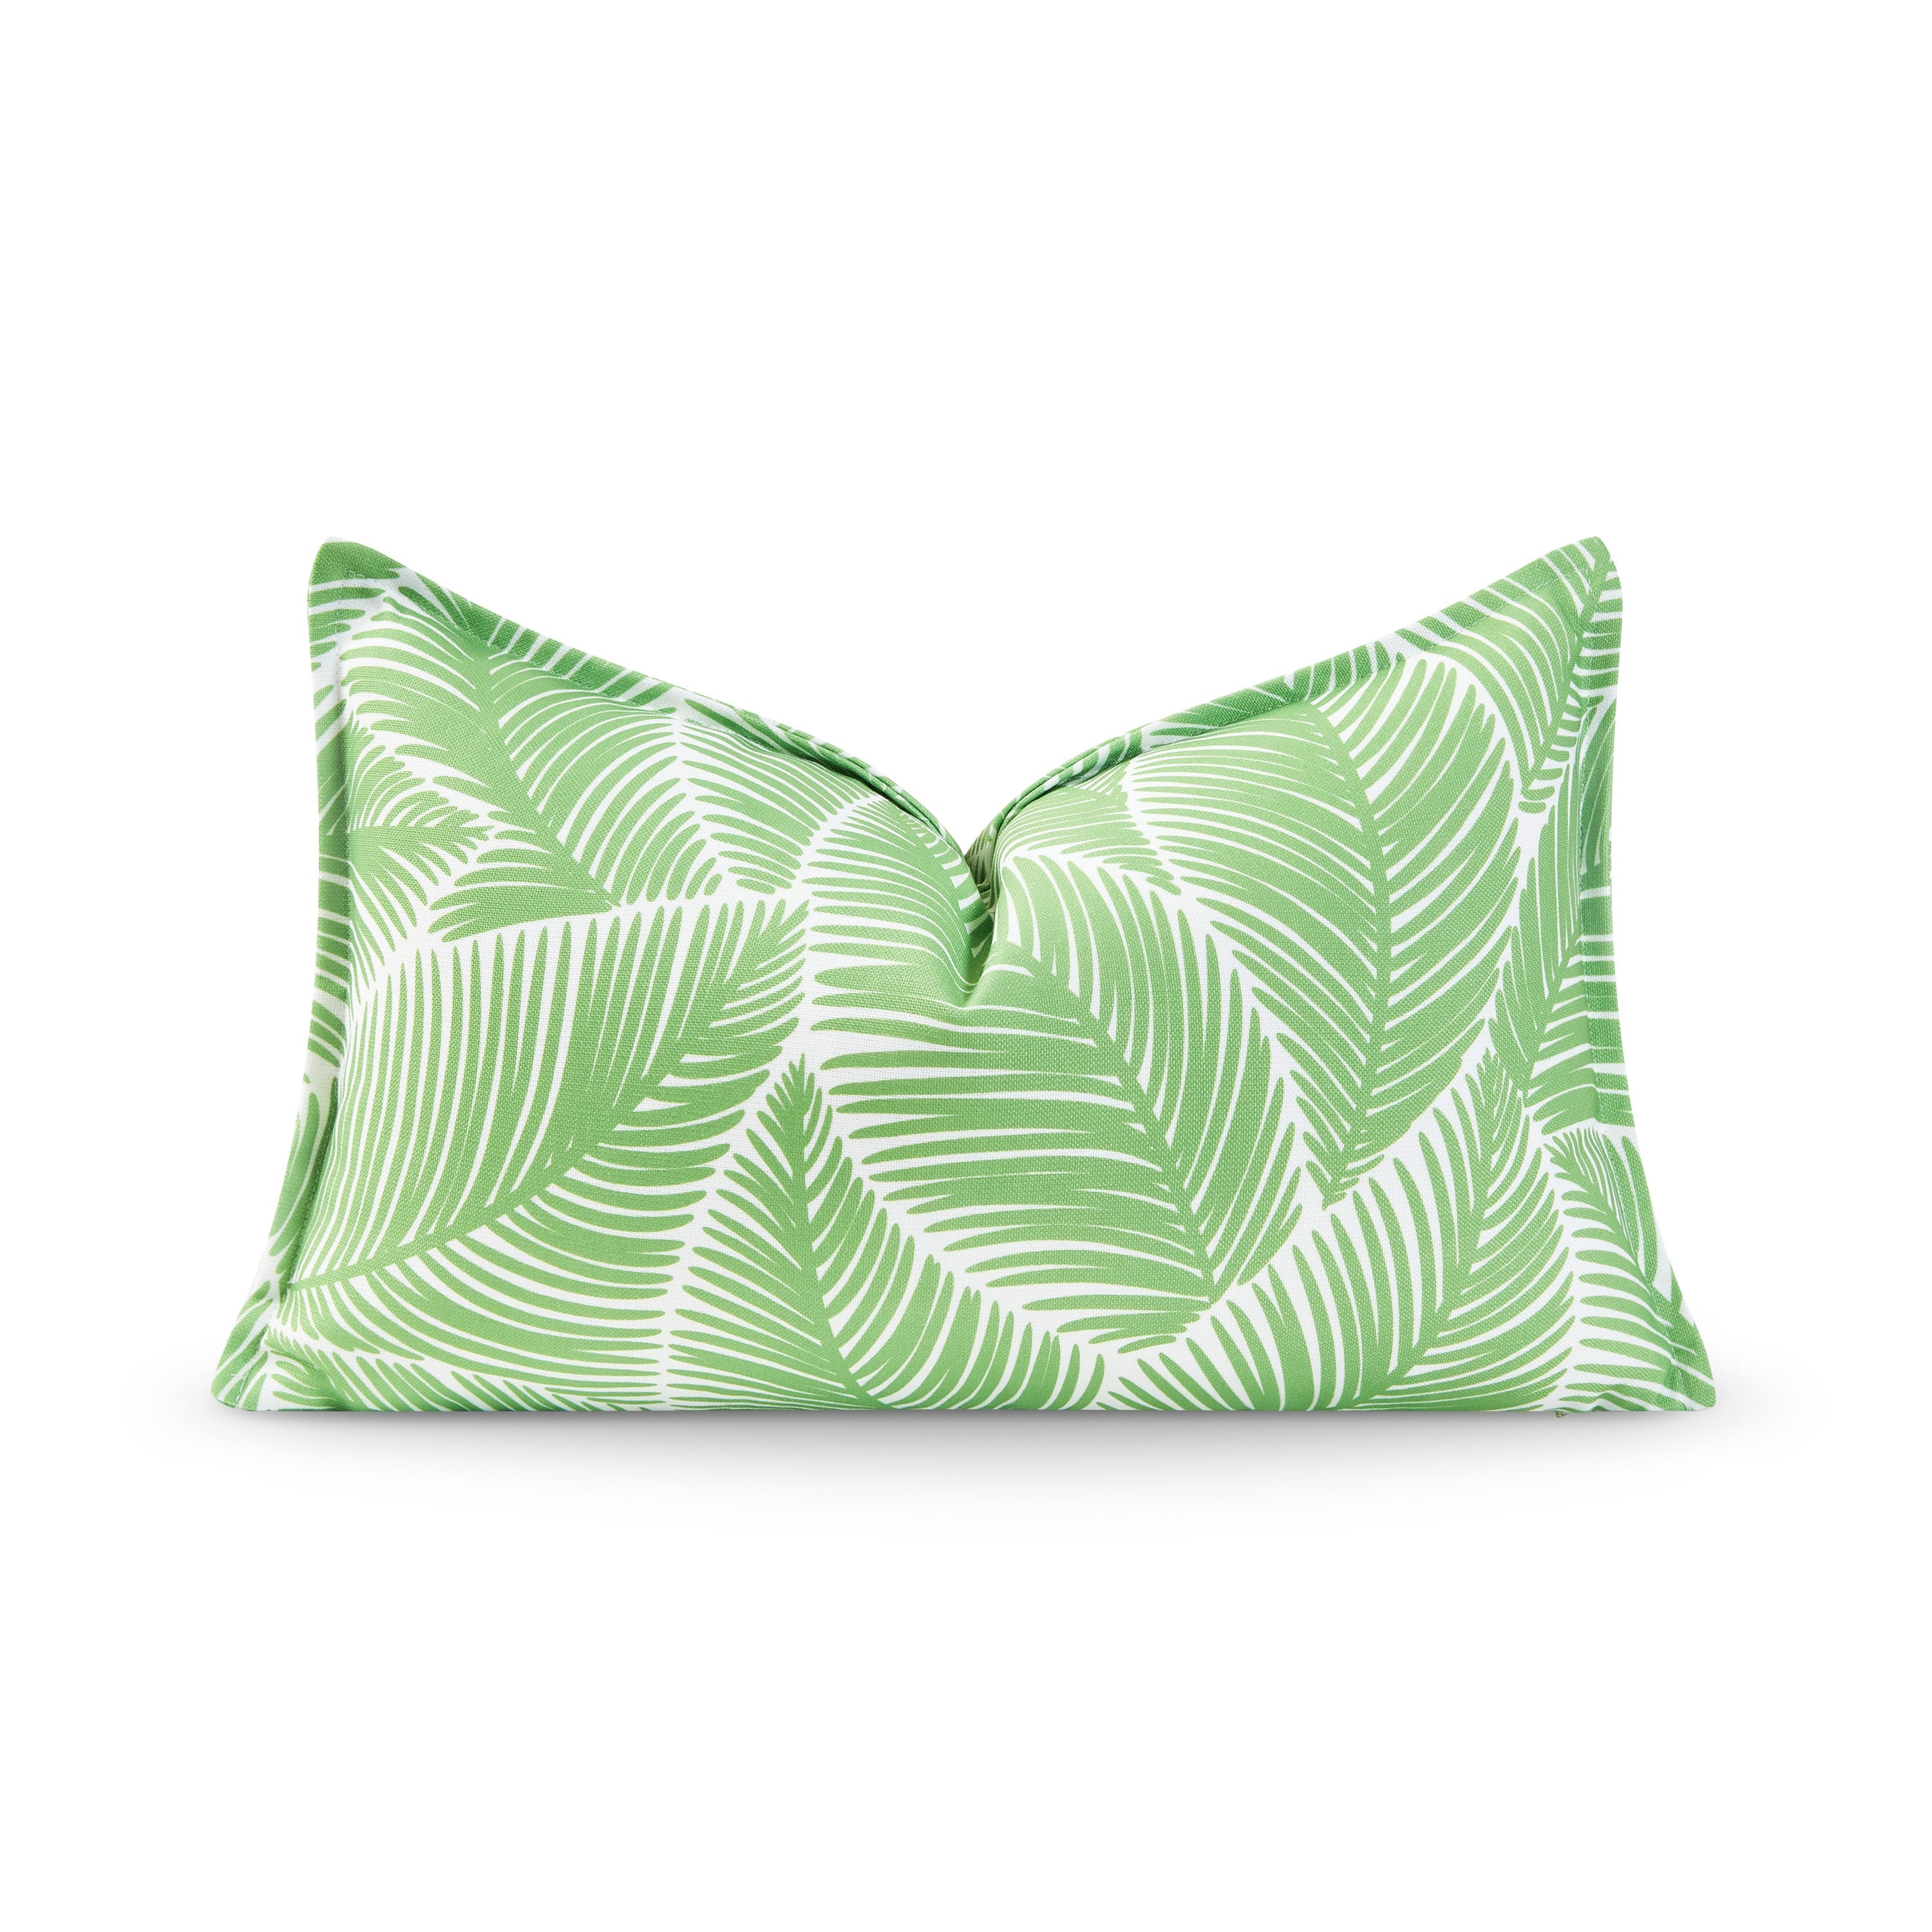 Coastal Indoor Outdoor Lumbar Pillow Cover, Palm Leaf, Pale Green, 12"x20"